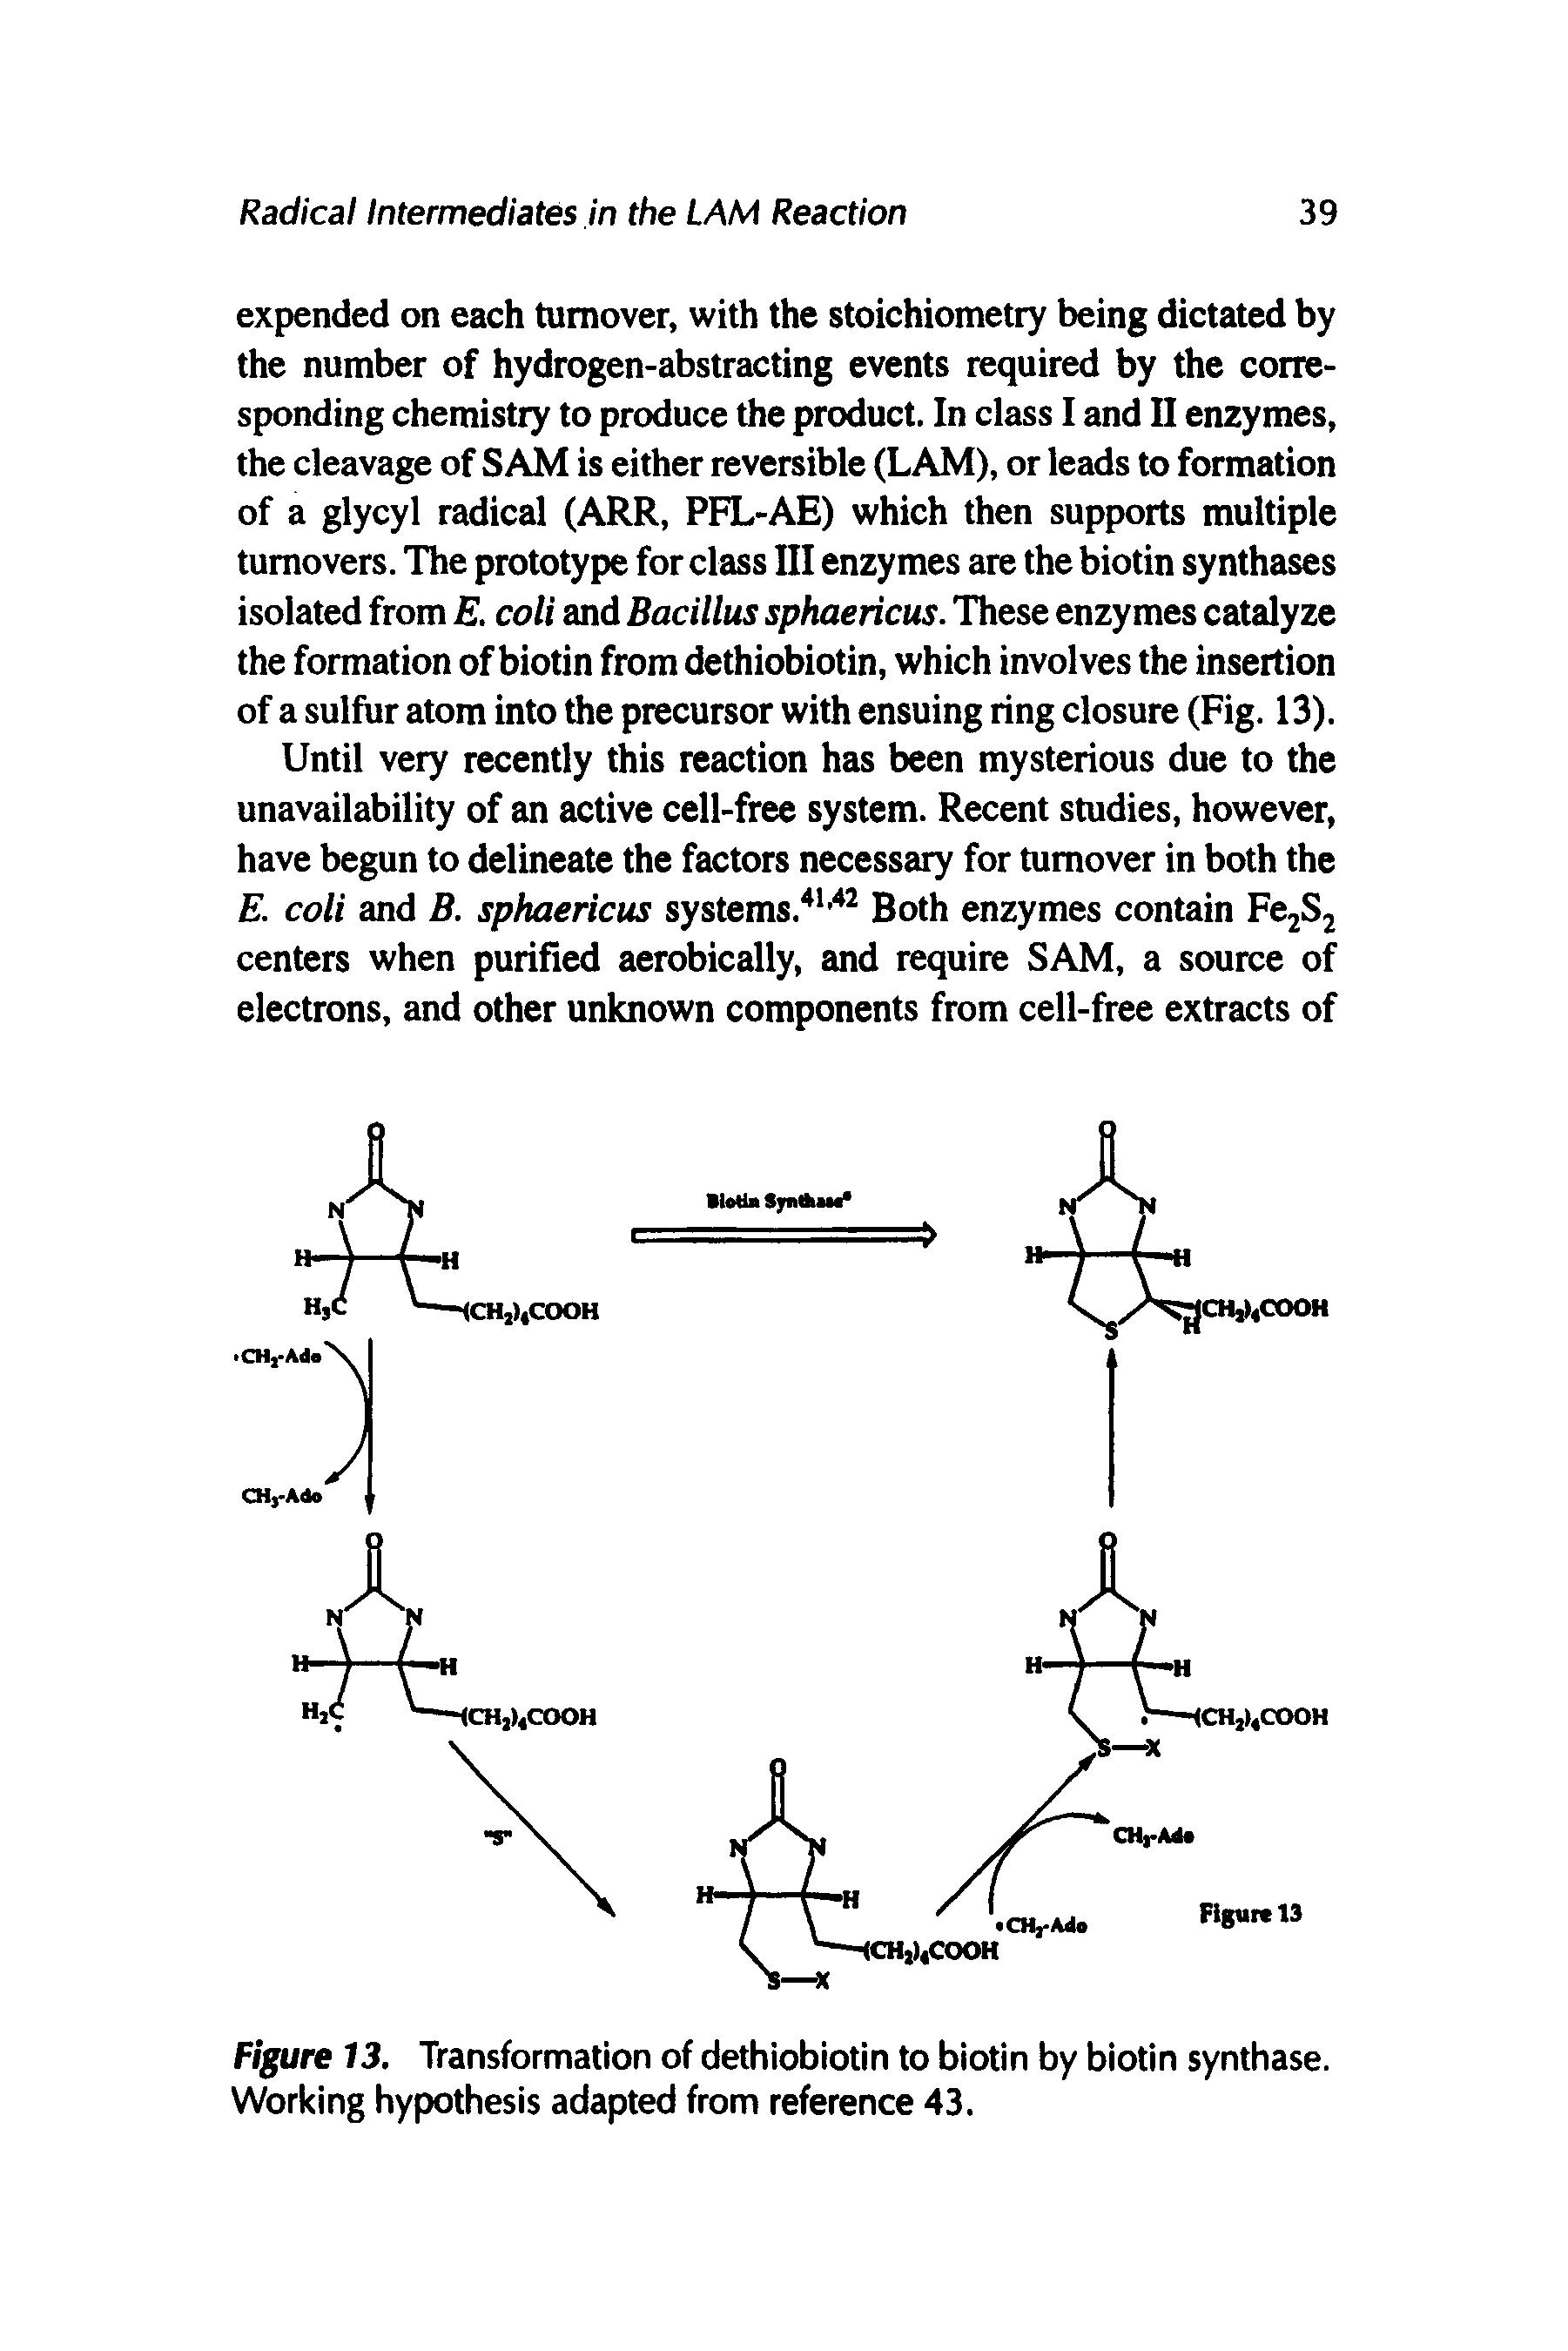 Figure 13. Transformation of dethiobiotin to biotin by biotin synthase. Working hypothesis adapted from reference 43.